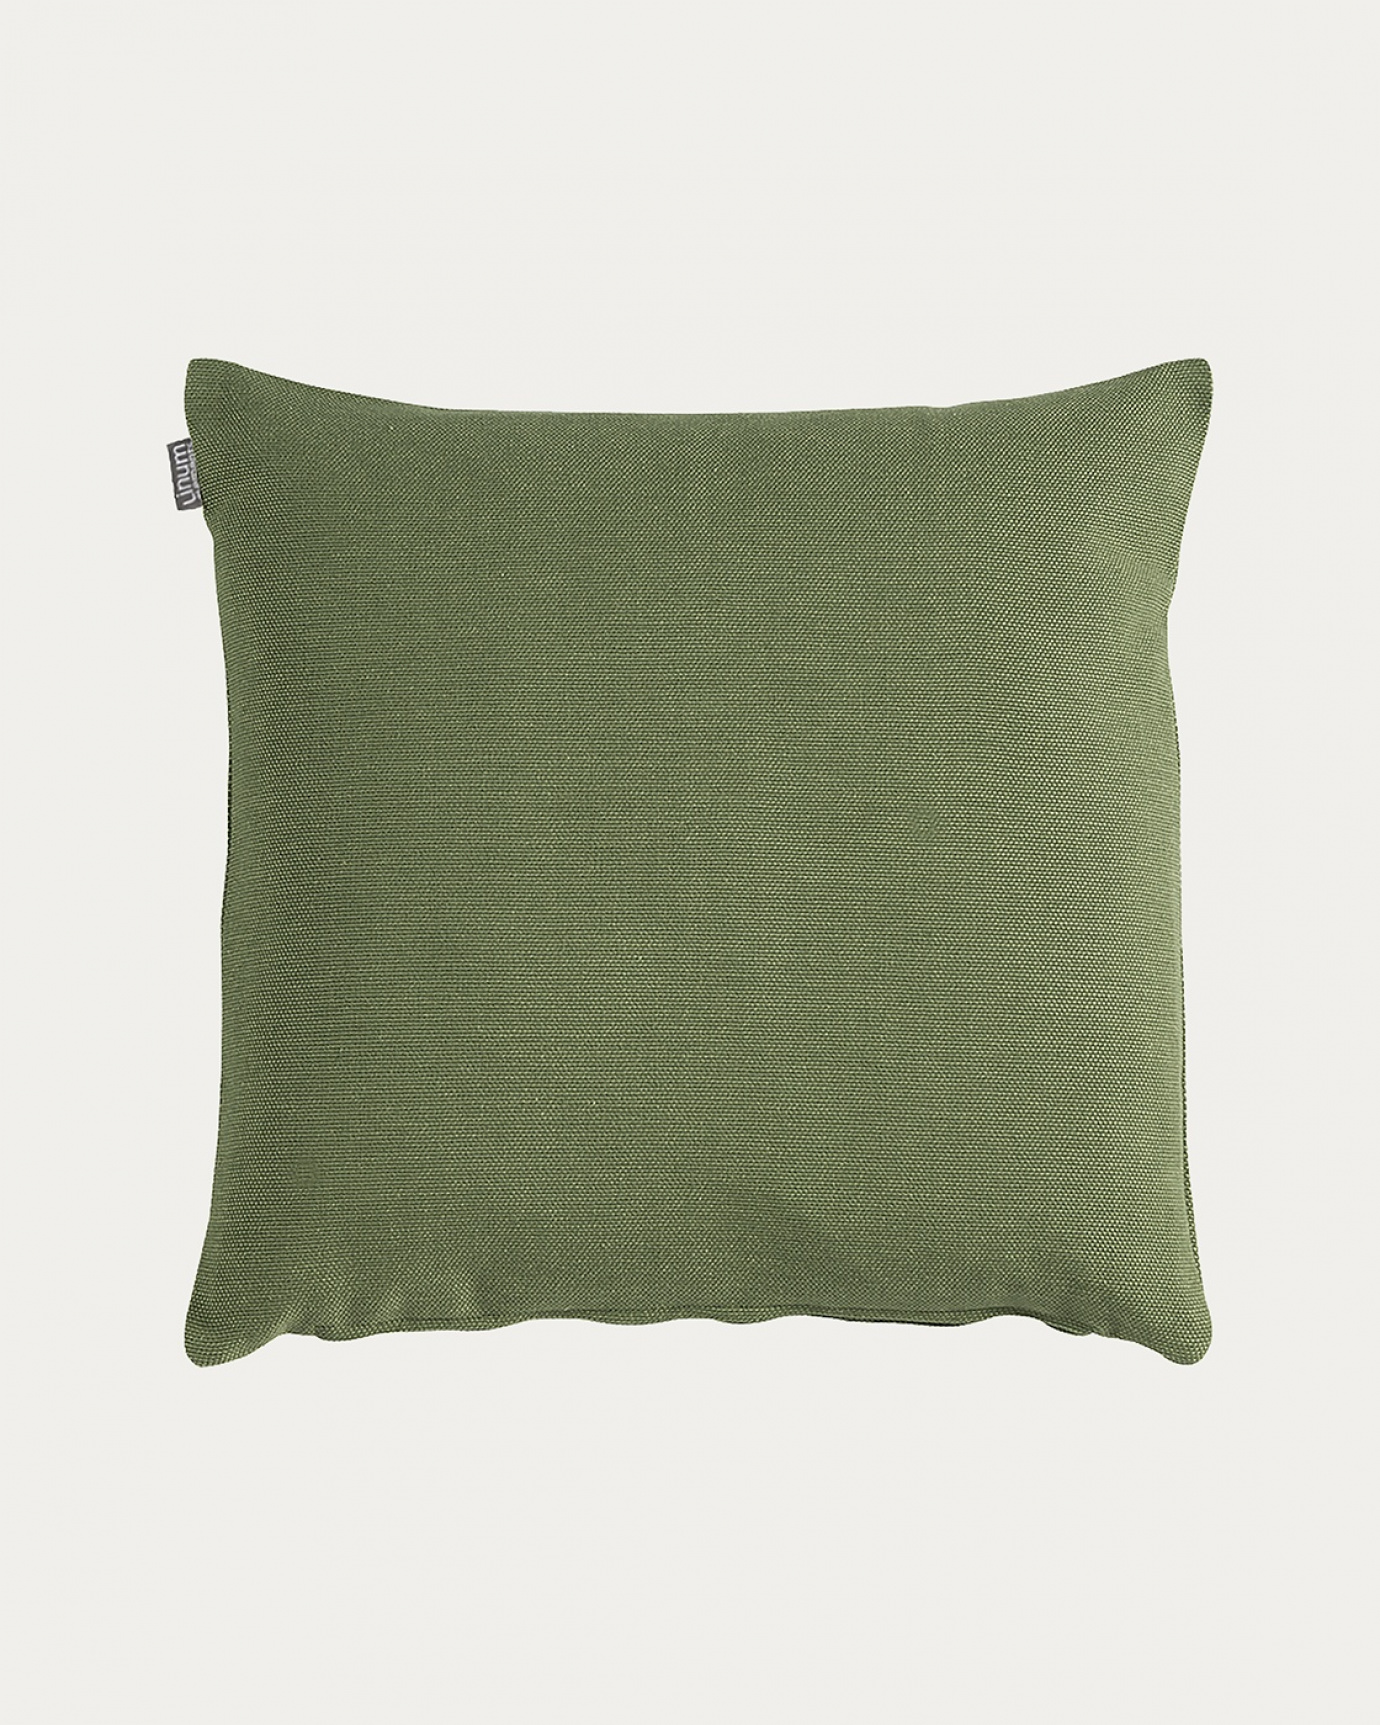 Product image light cypress green PEPPER cushion cover made of soft cotton from LINUM DESIGN. Easy to wash and durable for generations. Size 50x50 cm.